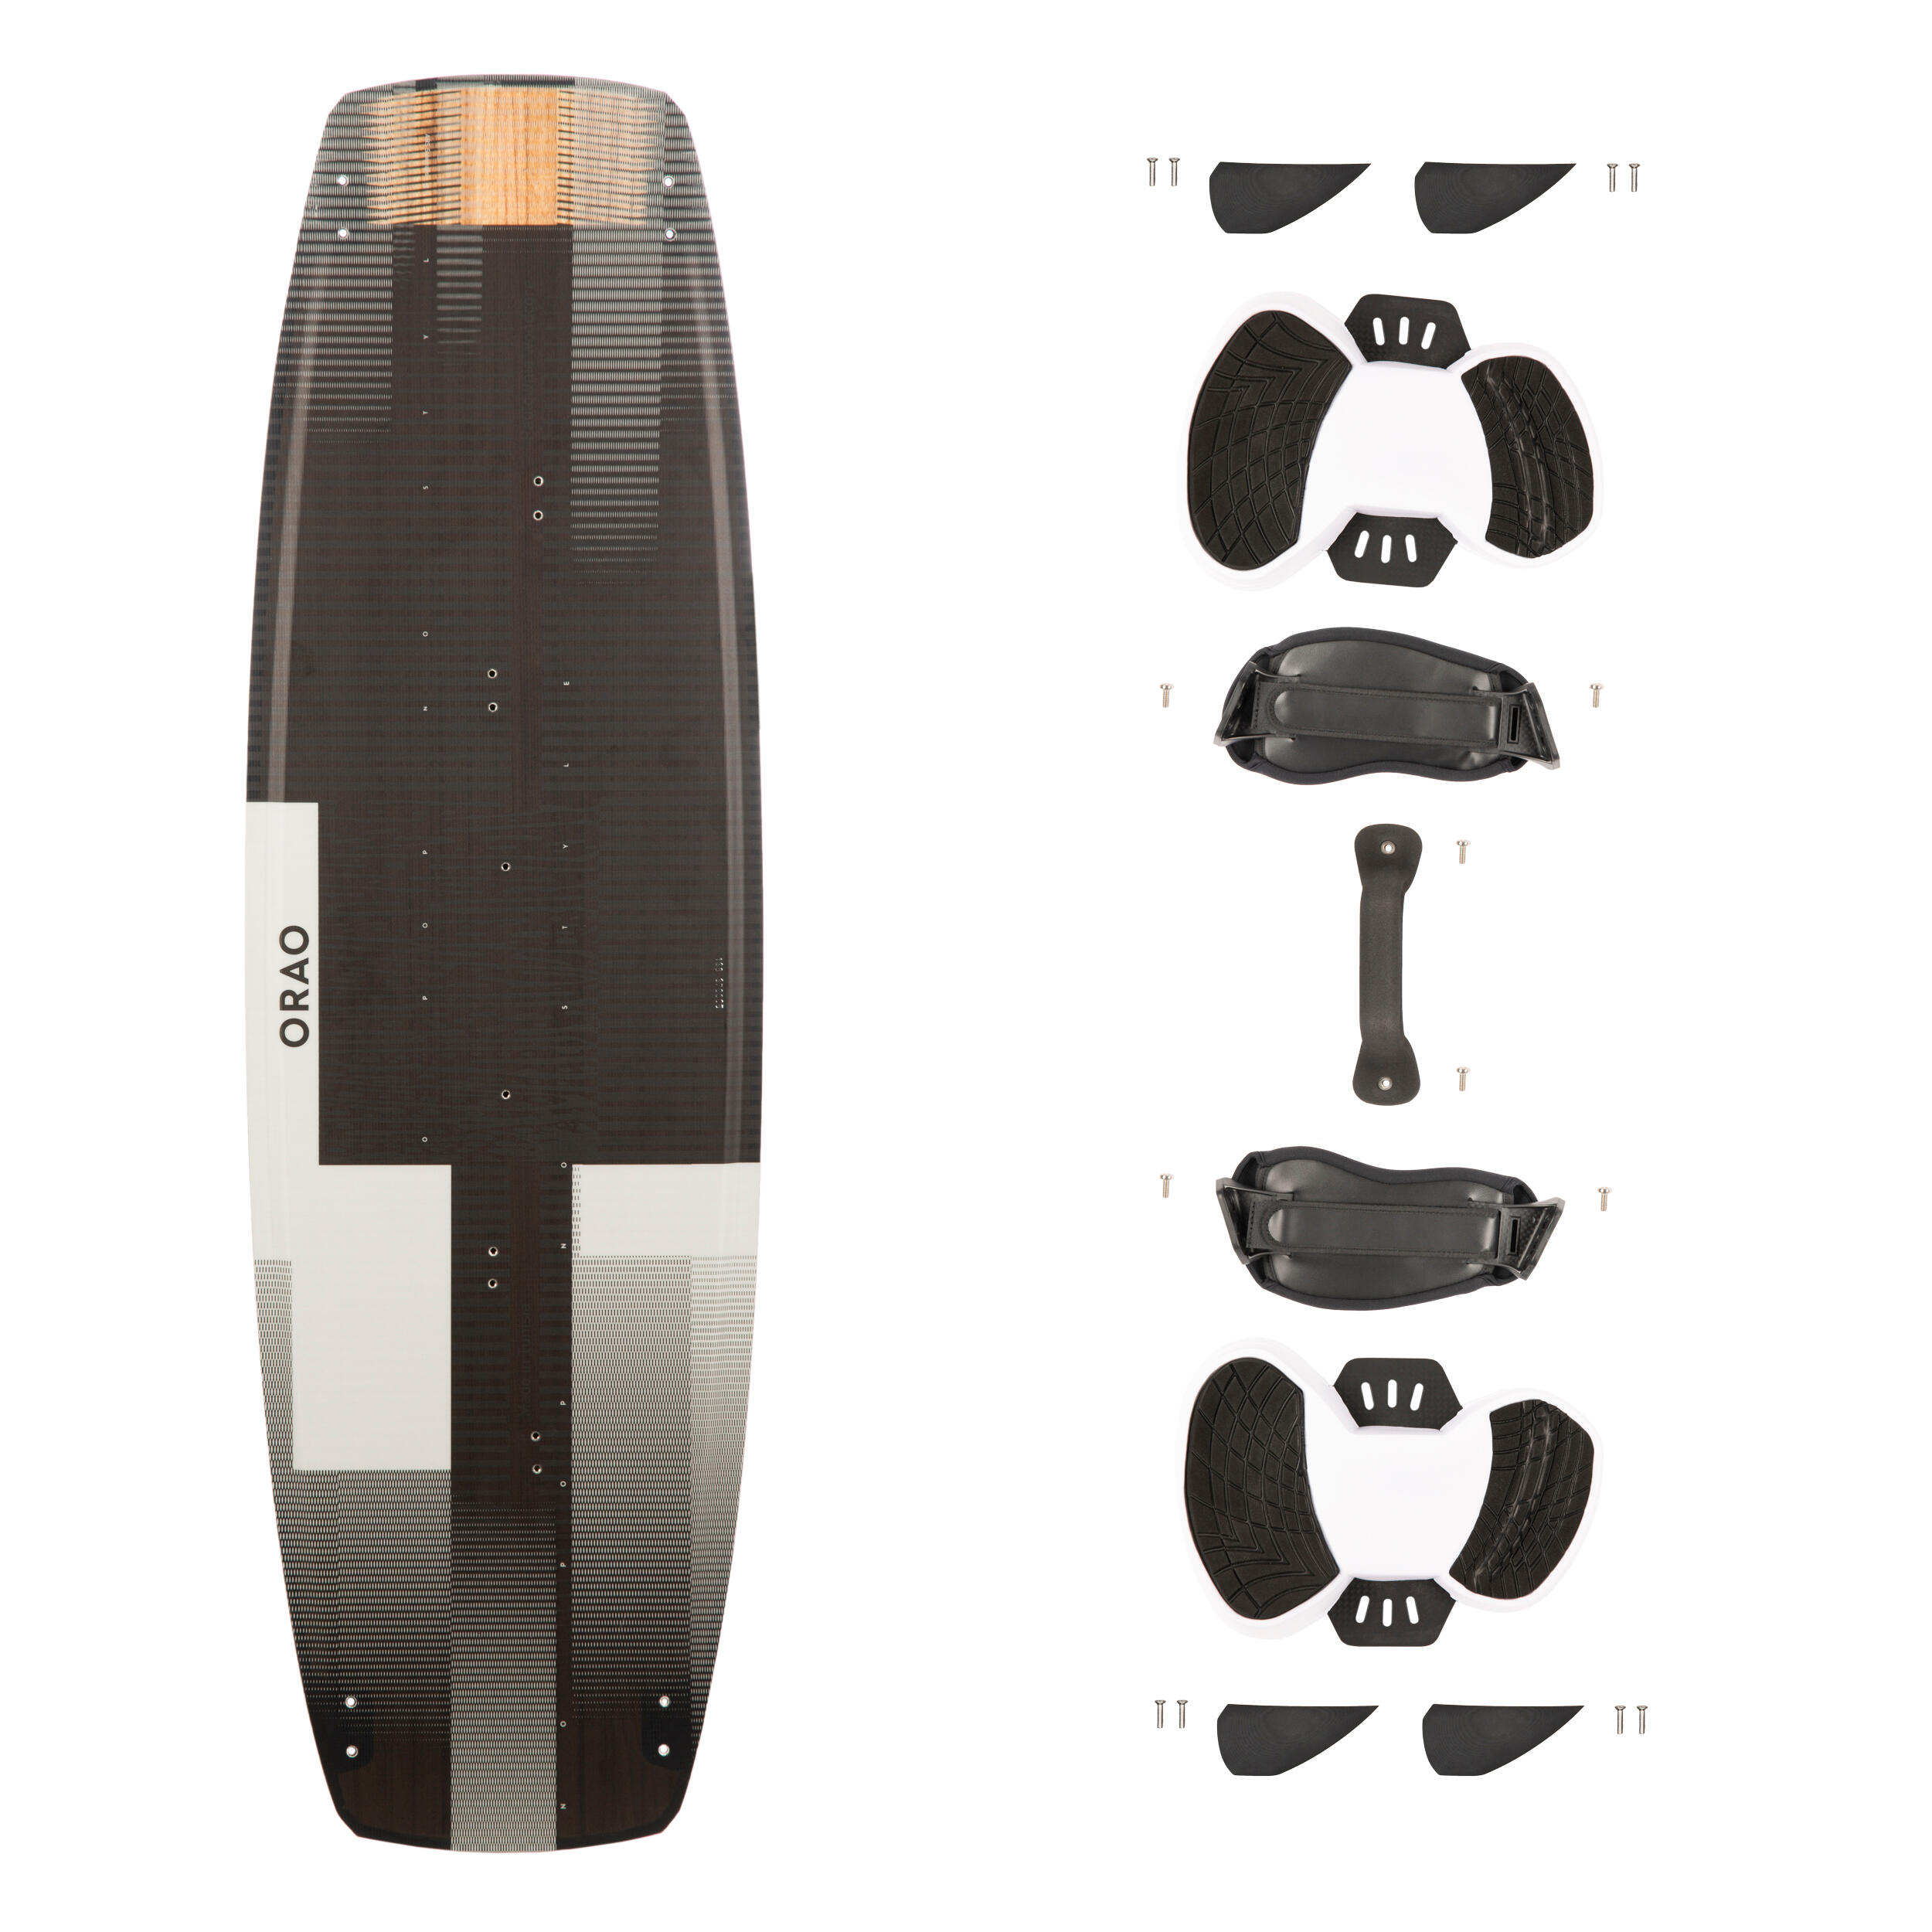 Twintip carbon kitesurf board 138 x 41 cm (pads and straps included) - TT500 1/18